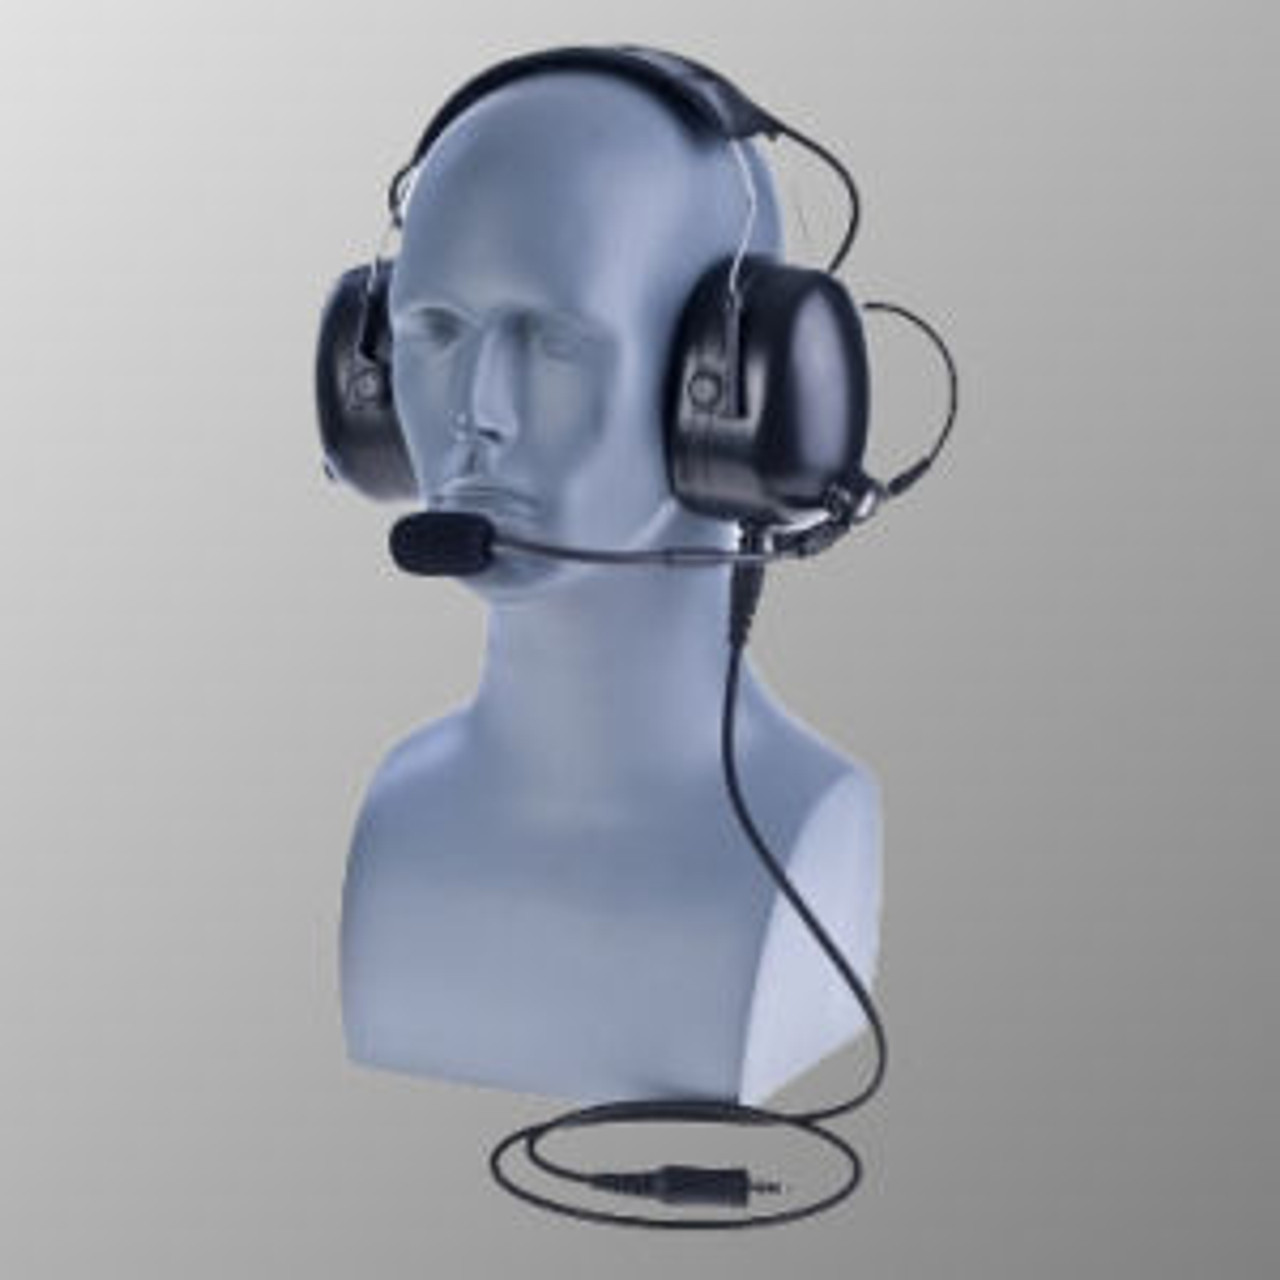 Motorola XPR6350 Over The Head Double Muff Headset With WIreless PTT